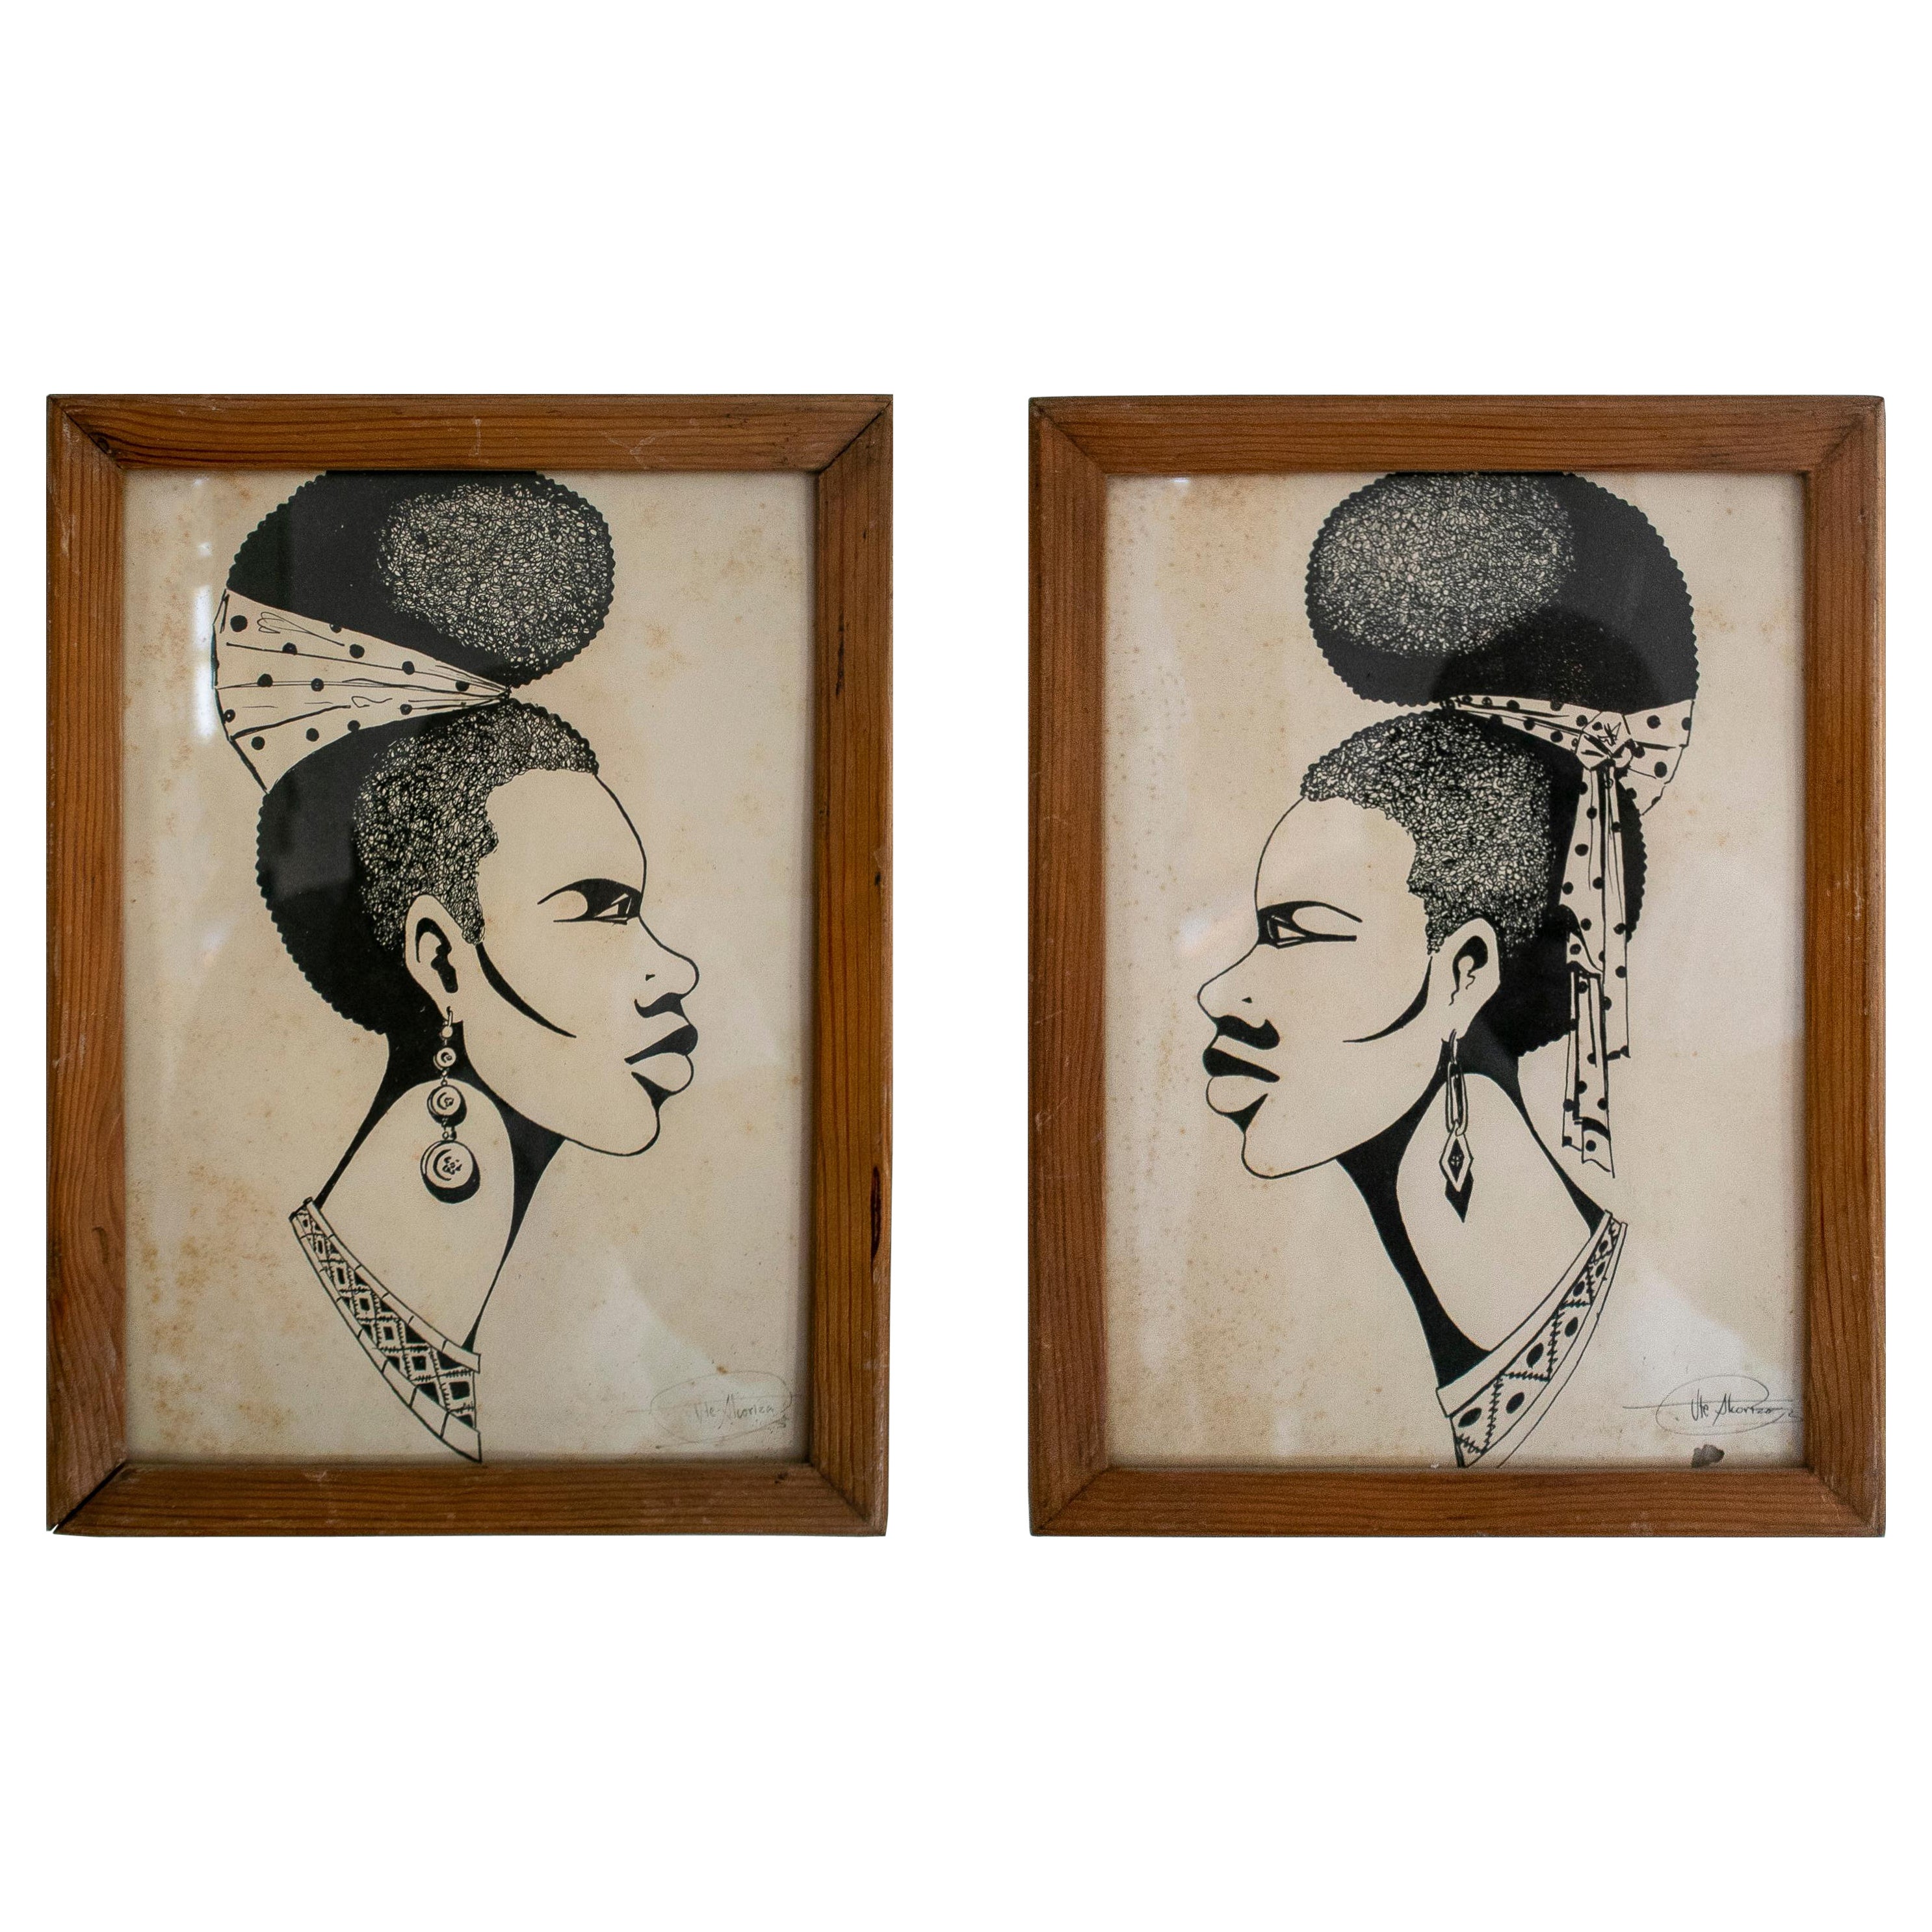 Pair of 1950s African Ink Drawn African Framed Portraits Signed "Ute Alcortzo"